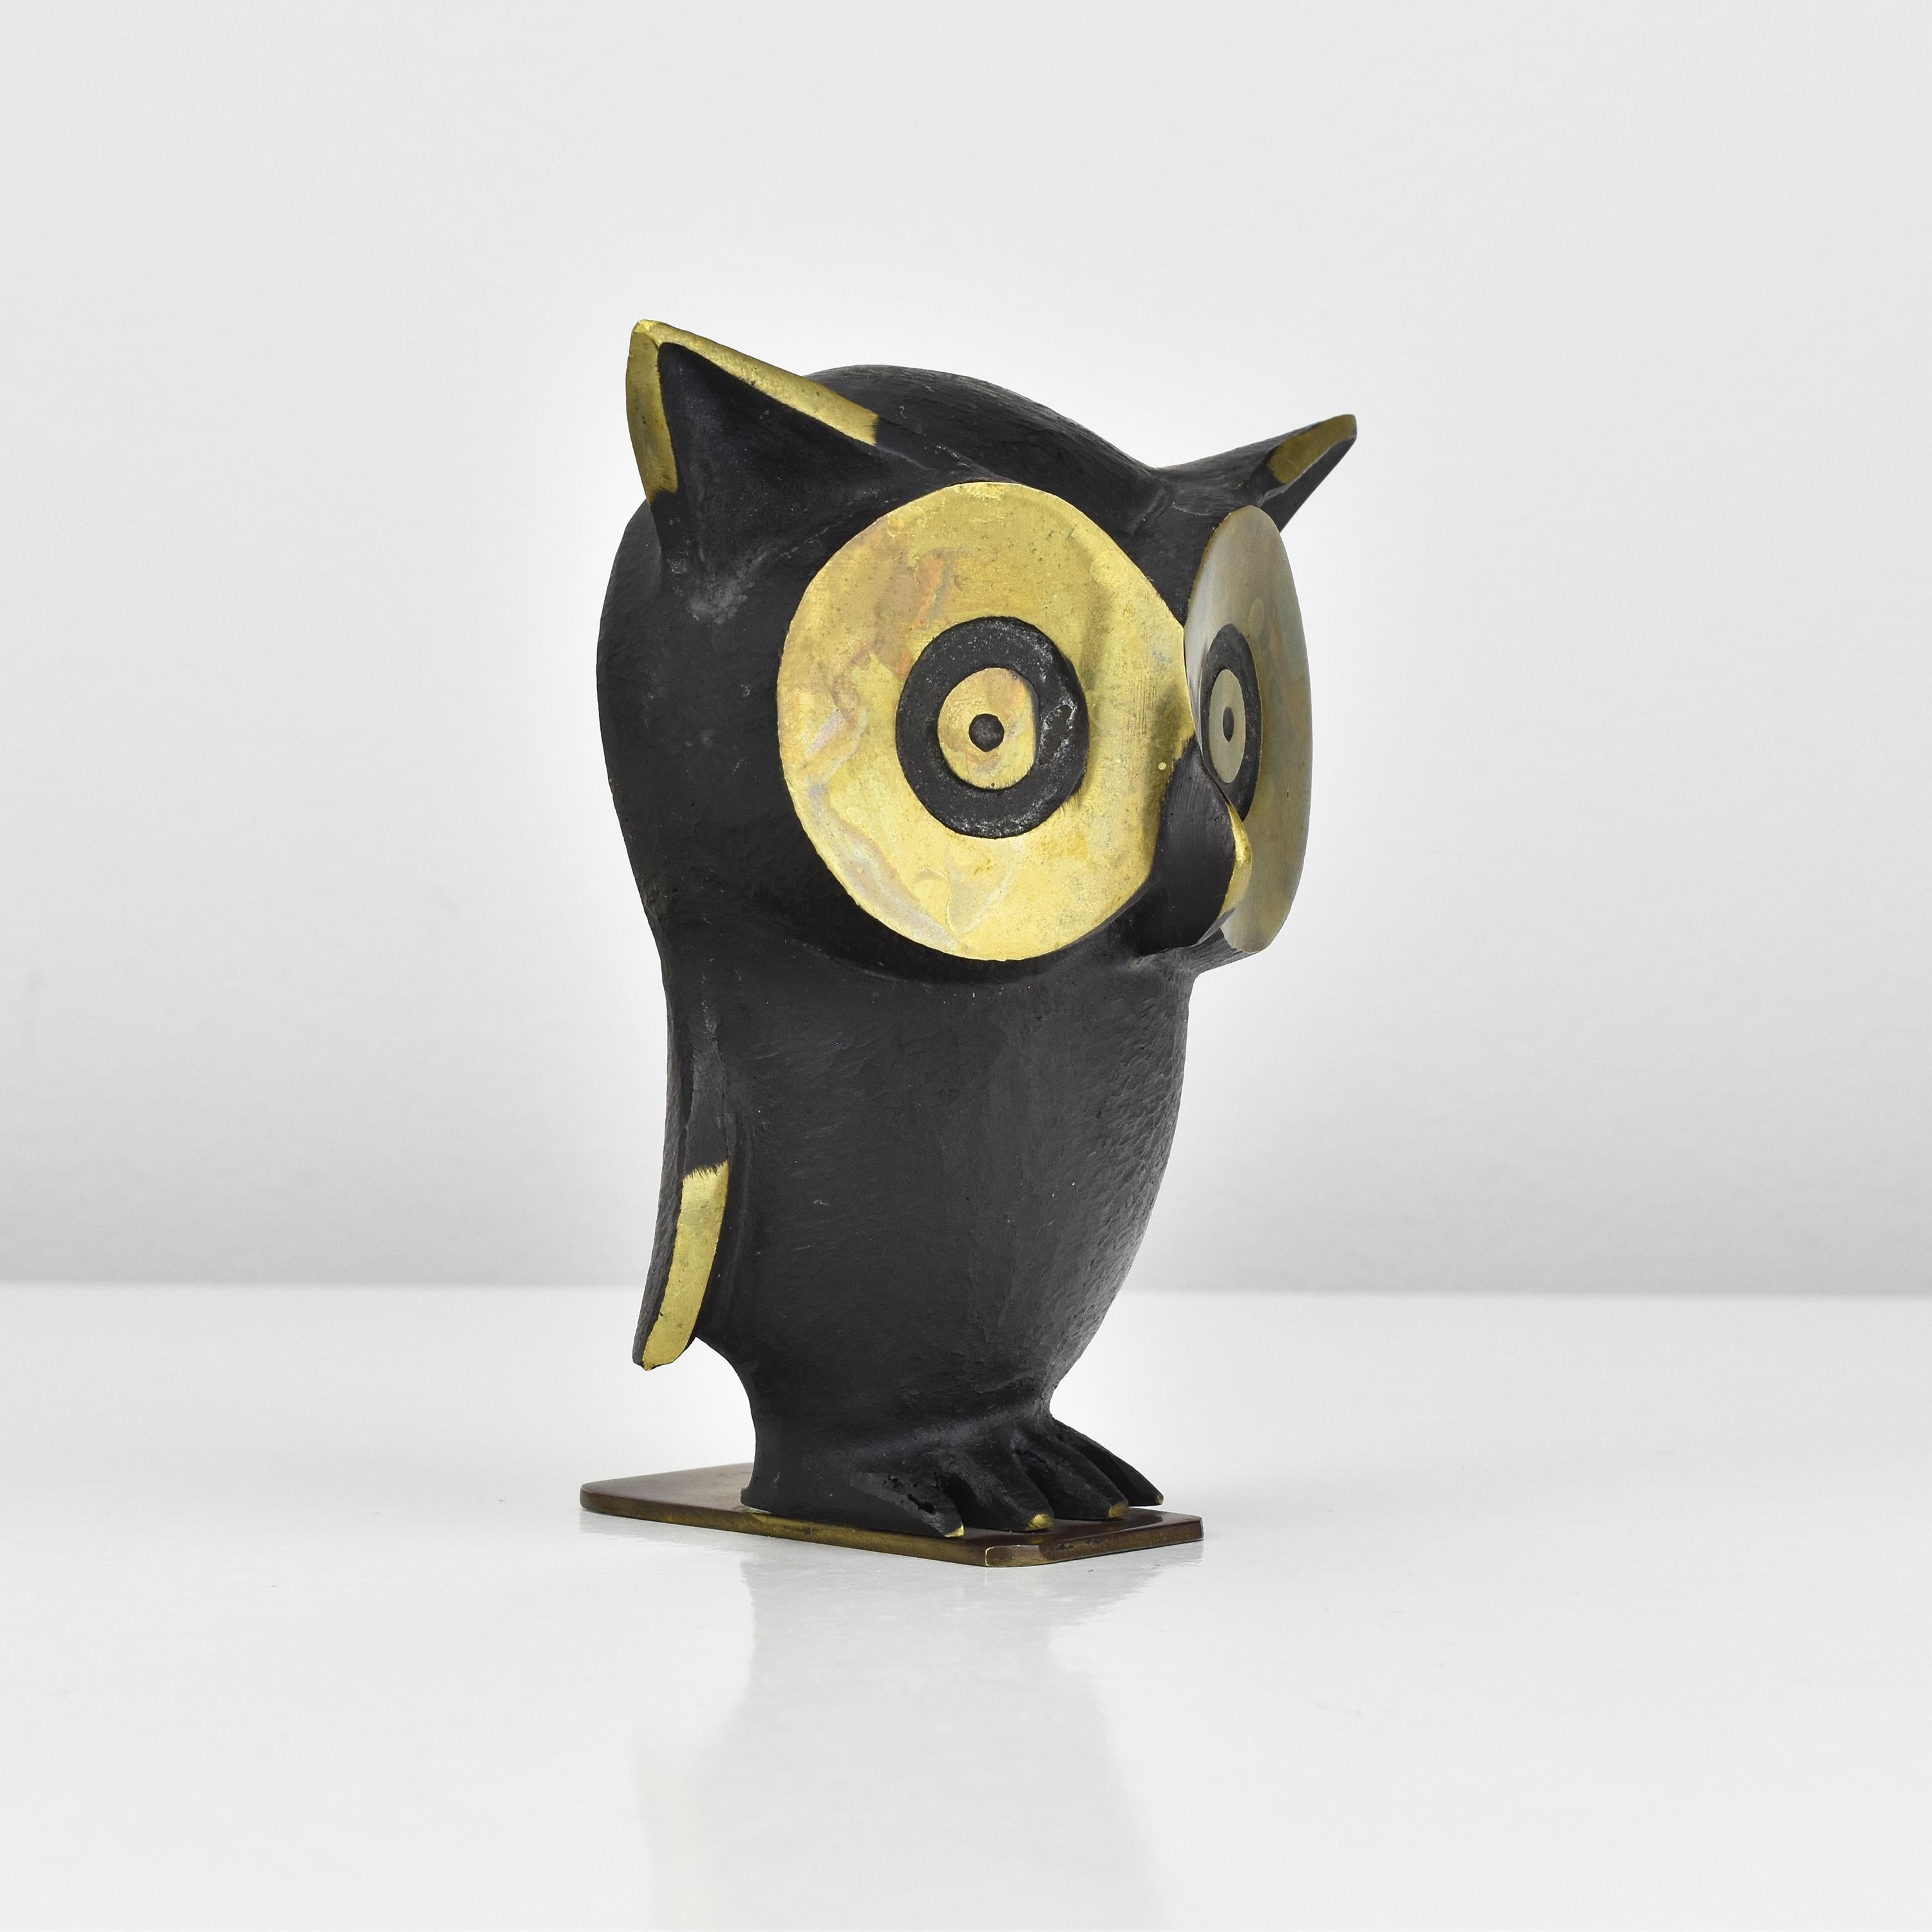 Owl Figurine or Bookend - Artistic Elegance from the Mid Century

This owl figurine or bookend is a charming example of art from the mid-20th century. It is crafted from partially black-patinated brass or bronze and was produced by Herta Baller.